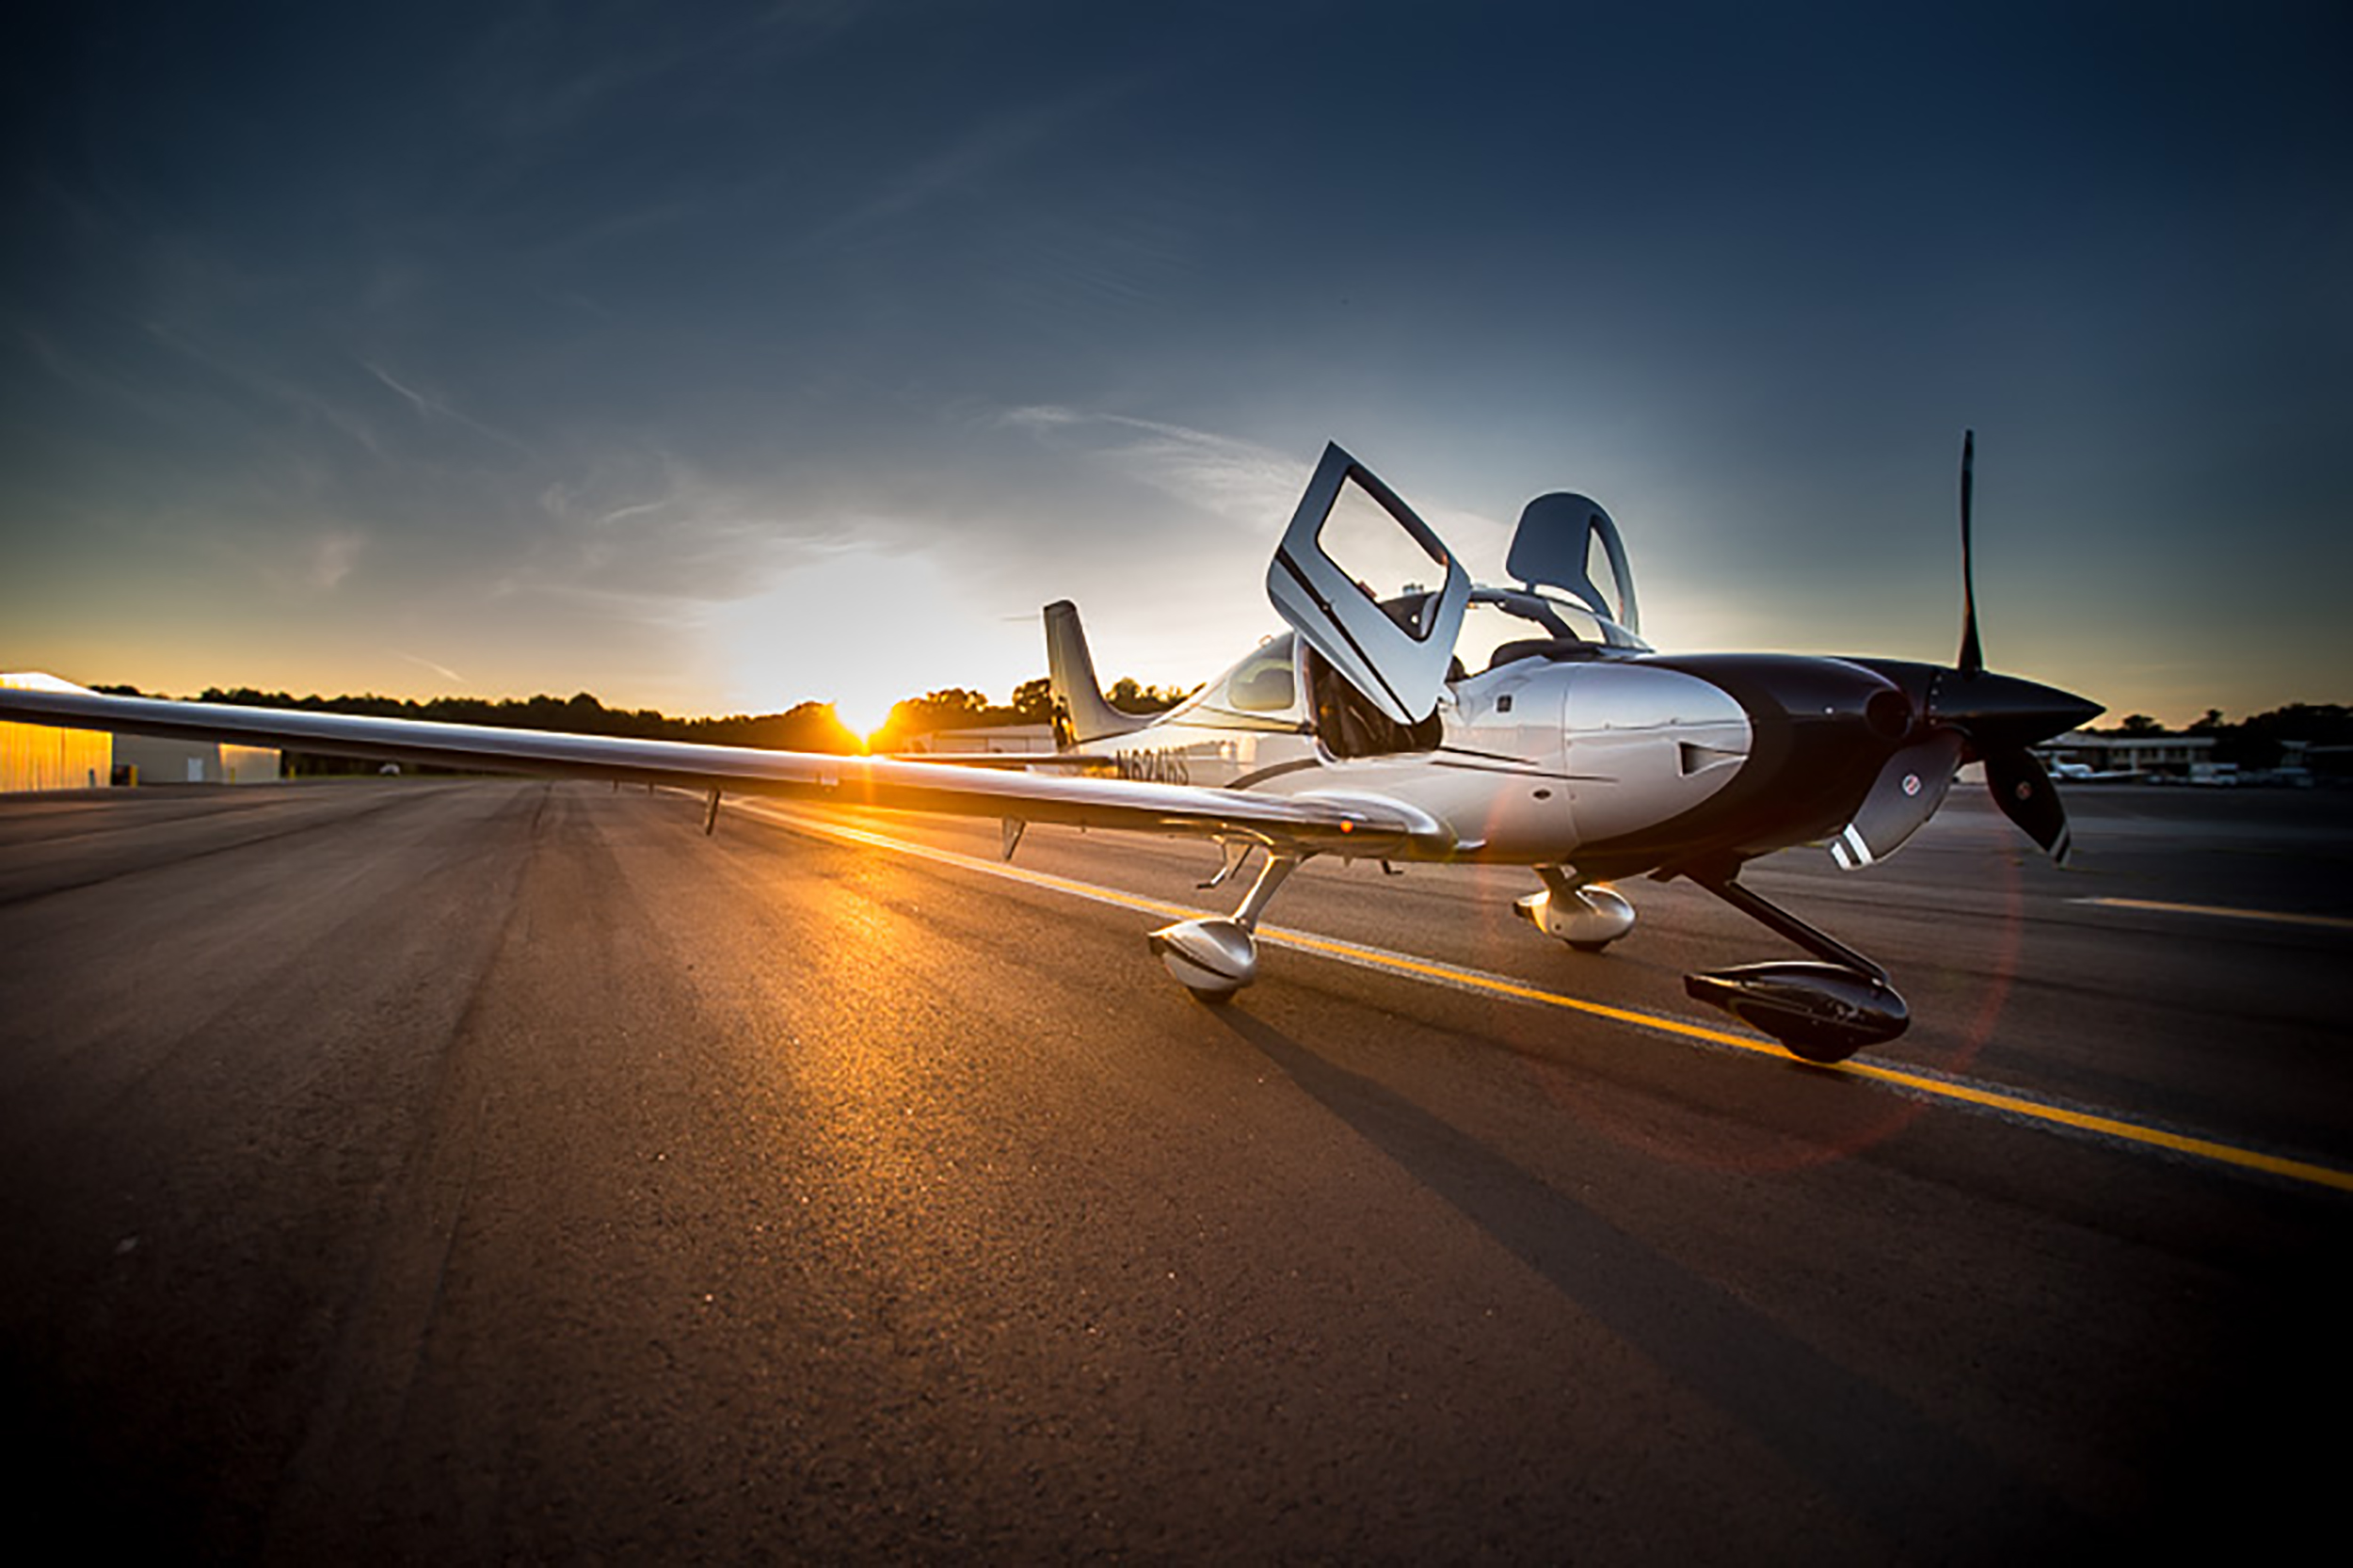 Cirrus Sr22 Wallpaper 9 Image Sr22 Download HD Wallpaper And Free Image, Air To Air Basics With Sigma S Zoom Lenses Sigma Blog, Cirrus Releases Sr22t Generation 6 Article Fri